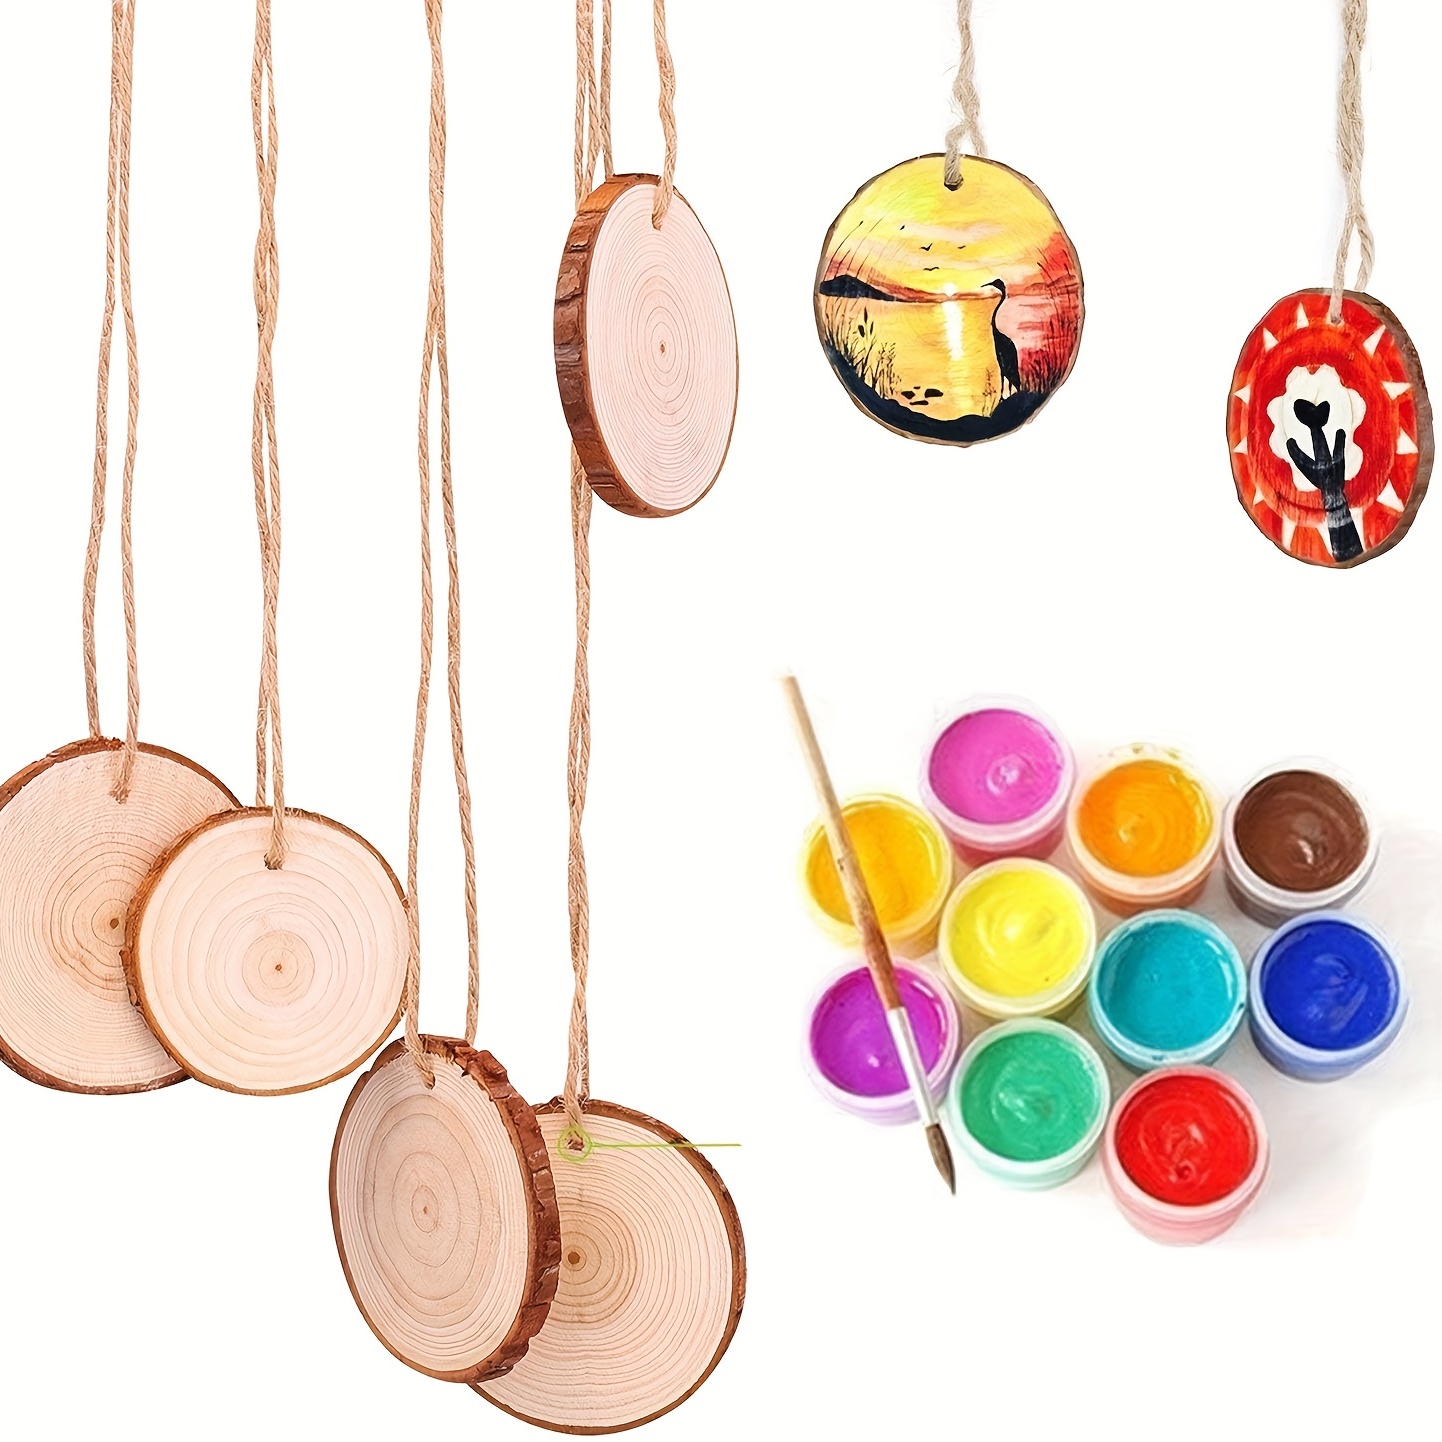 Deago 10 Pcs Natural Wood Slices Set Wood Rounds kit with Hole Wooden  Circles For DIY Arts and Crafts Christmas Party Ornaments (2-2.5inch) 